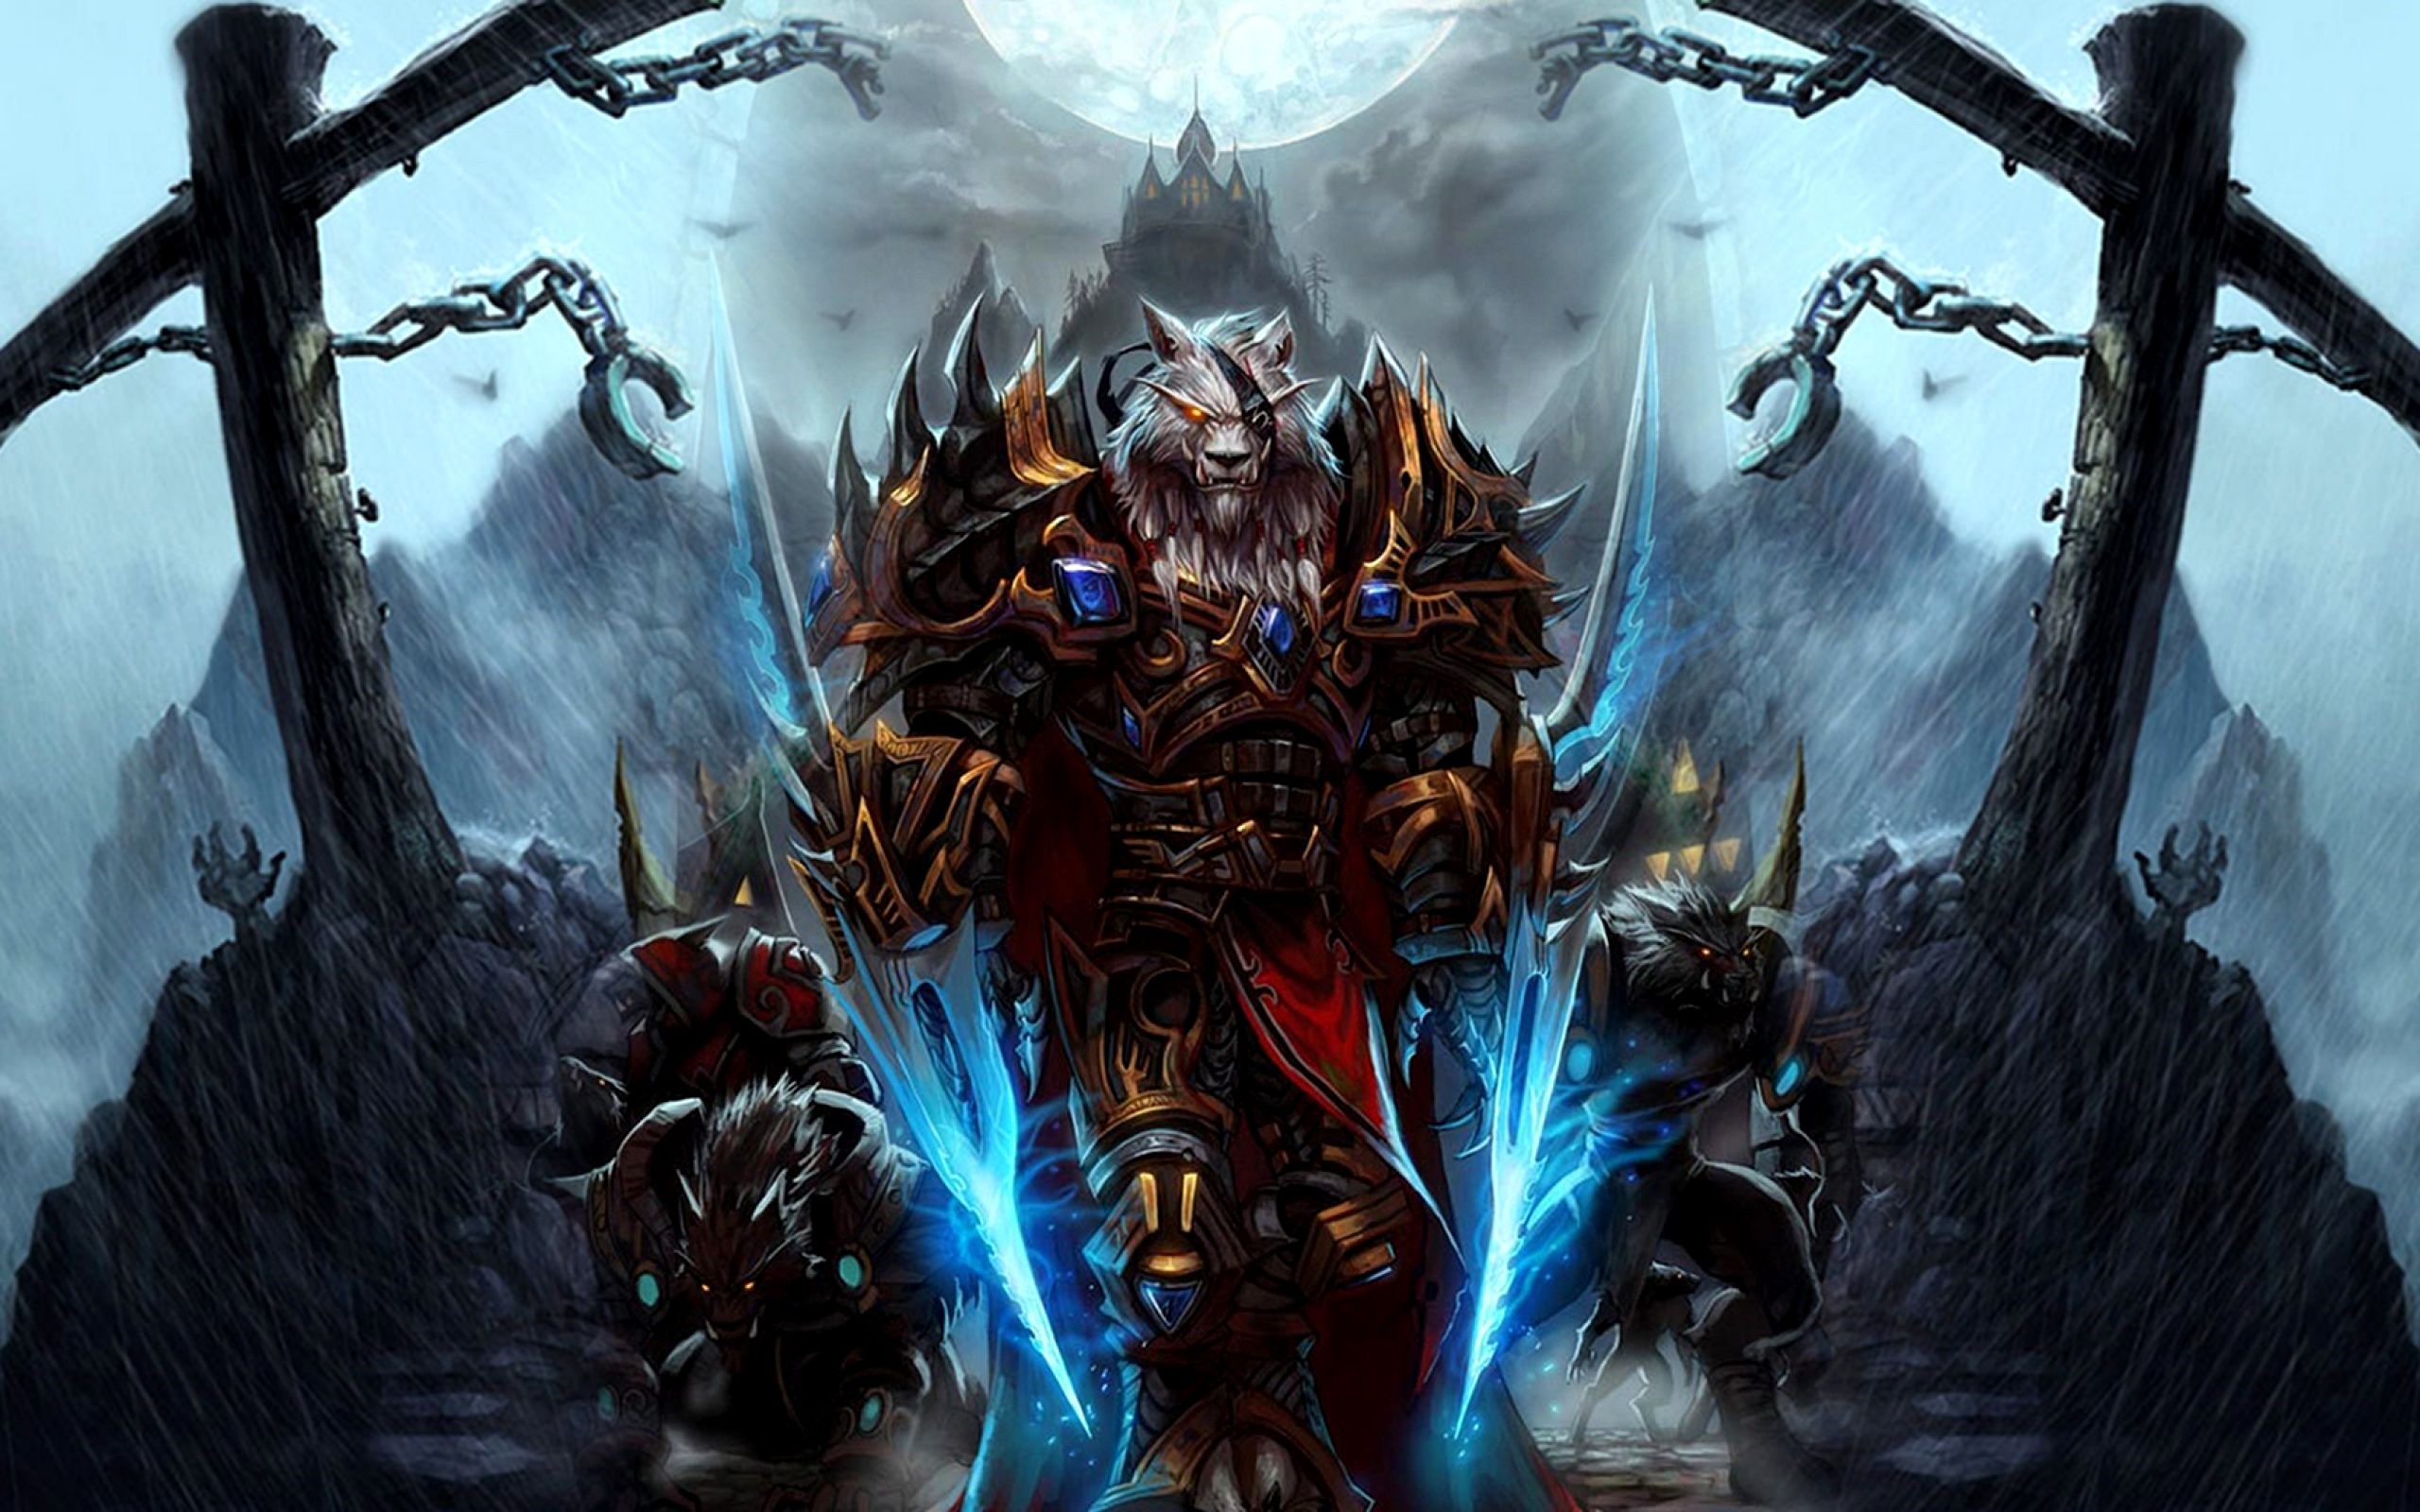 World Of Warcraft Cool 2021 Gaming Wallpapers